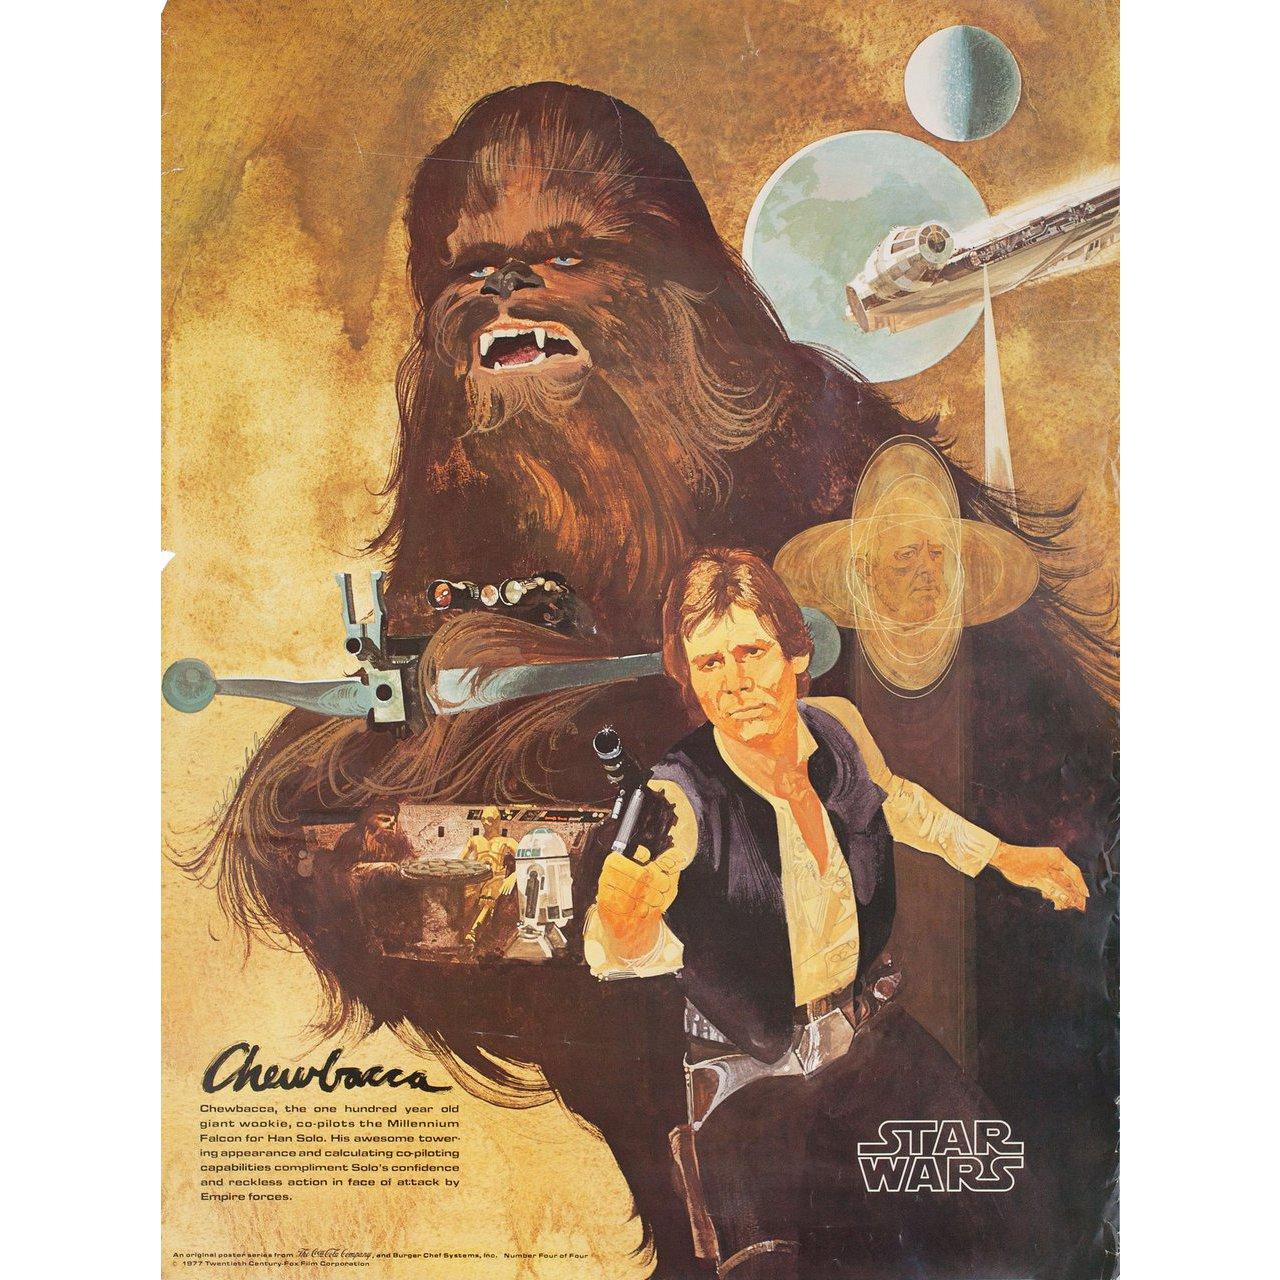 Original 1977 U.S. poster by Del Nichols for the film Star Wars (A New Hope) directed by George Lucas with Mark Hamill / Harrison Ford / Carrie Fisher / Alec Guinness / Peter Cushing. Very Good-Fine condition, rolled. Please note: the size is stated